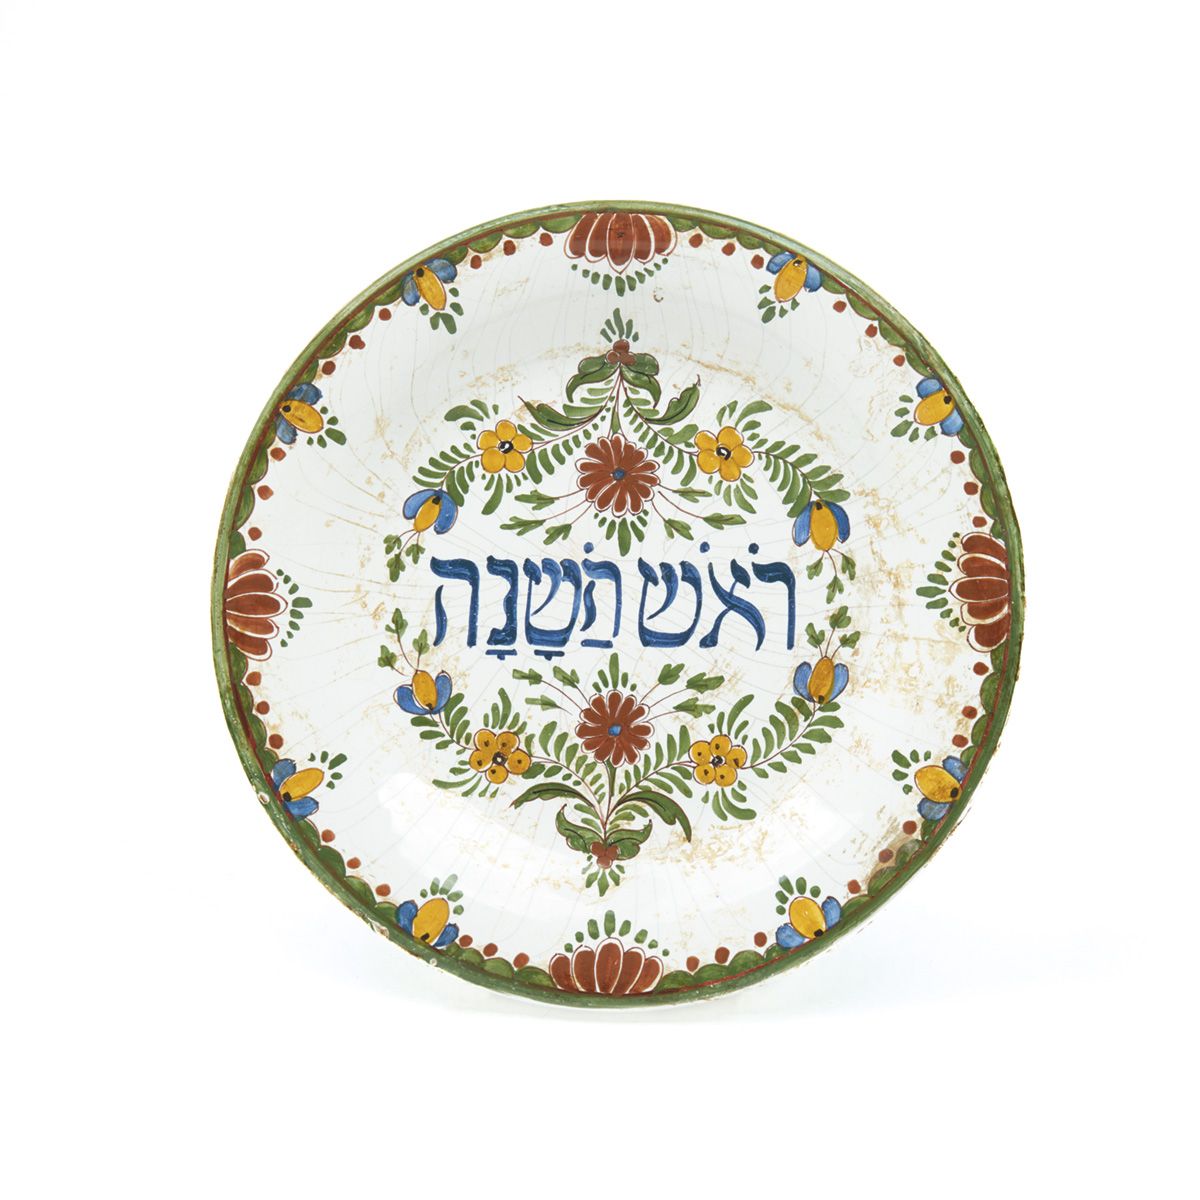 Glazed and colorfully painted around central Hebrew words: “Rosh ...